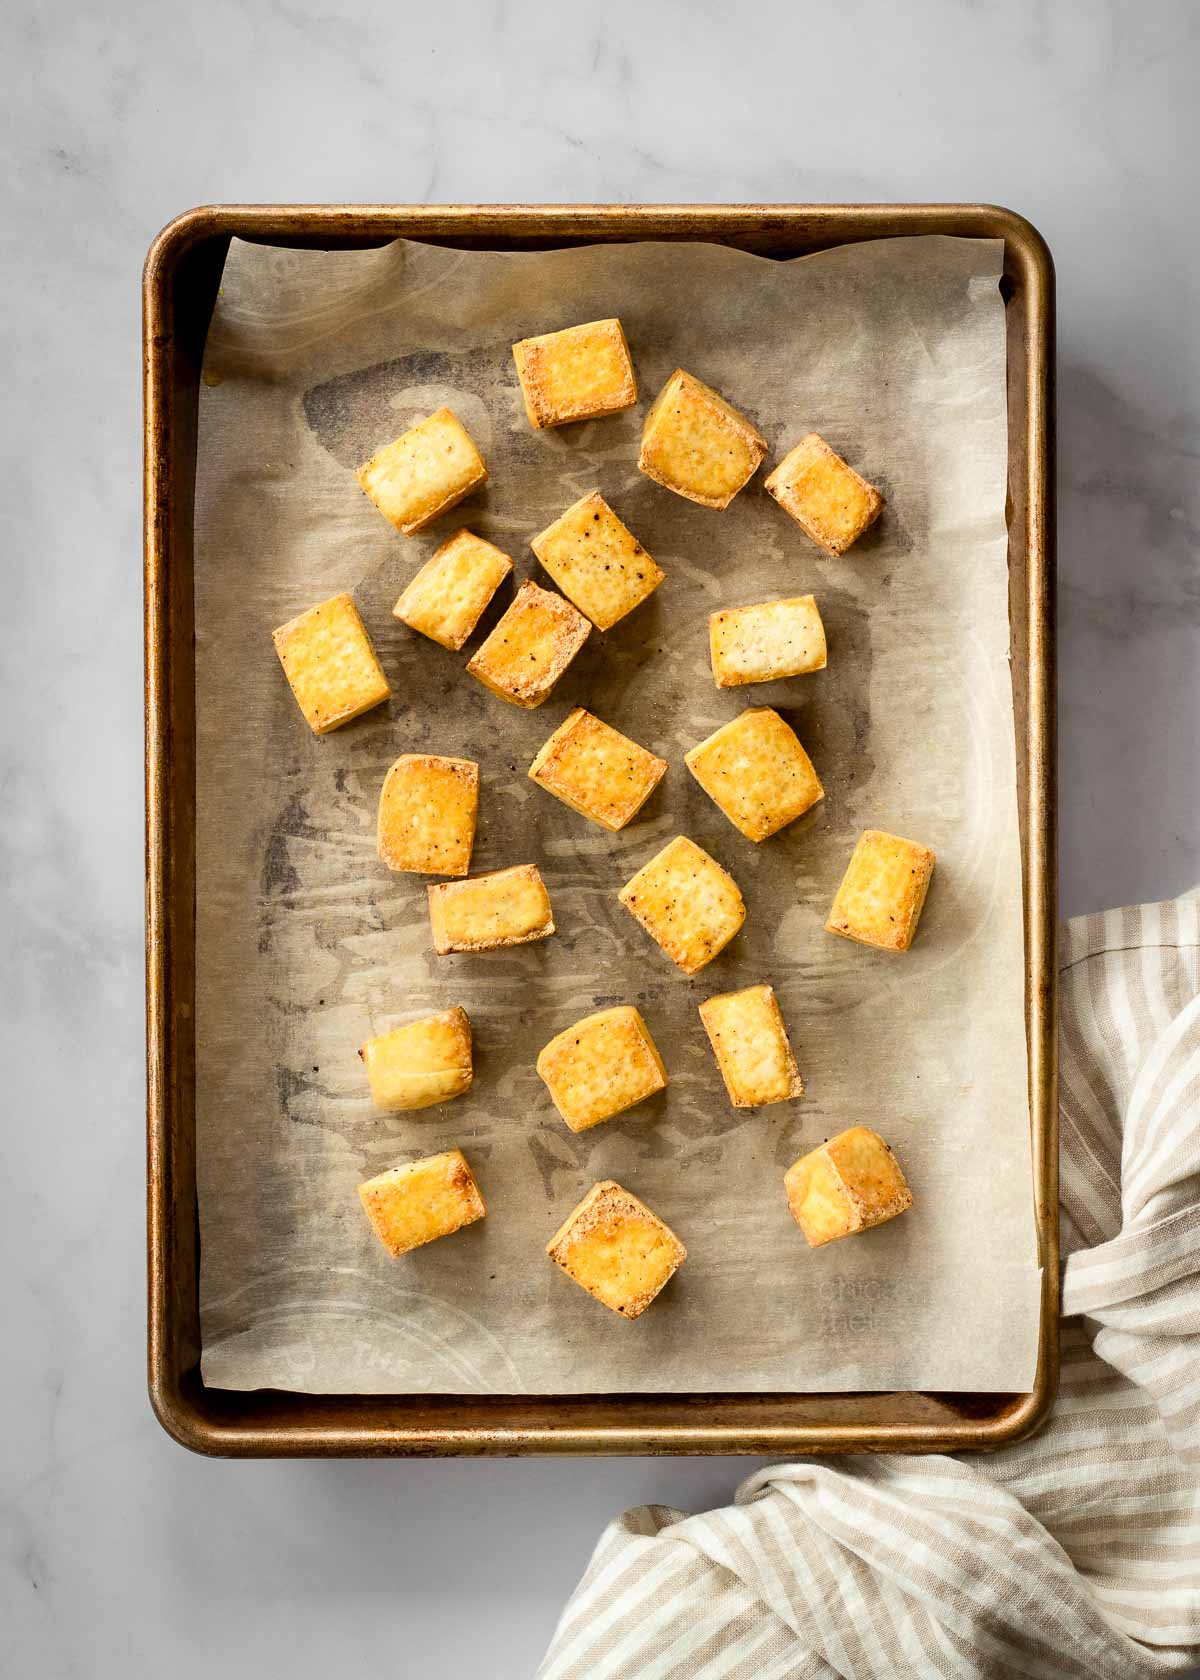 Golden broiled tofu sits on a parchment-lined baking sheet.